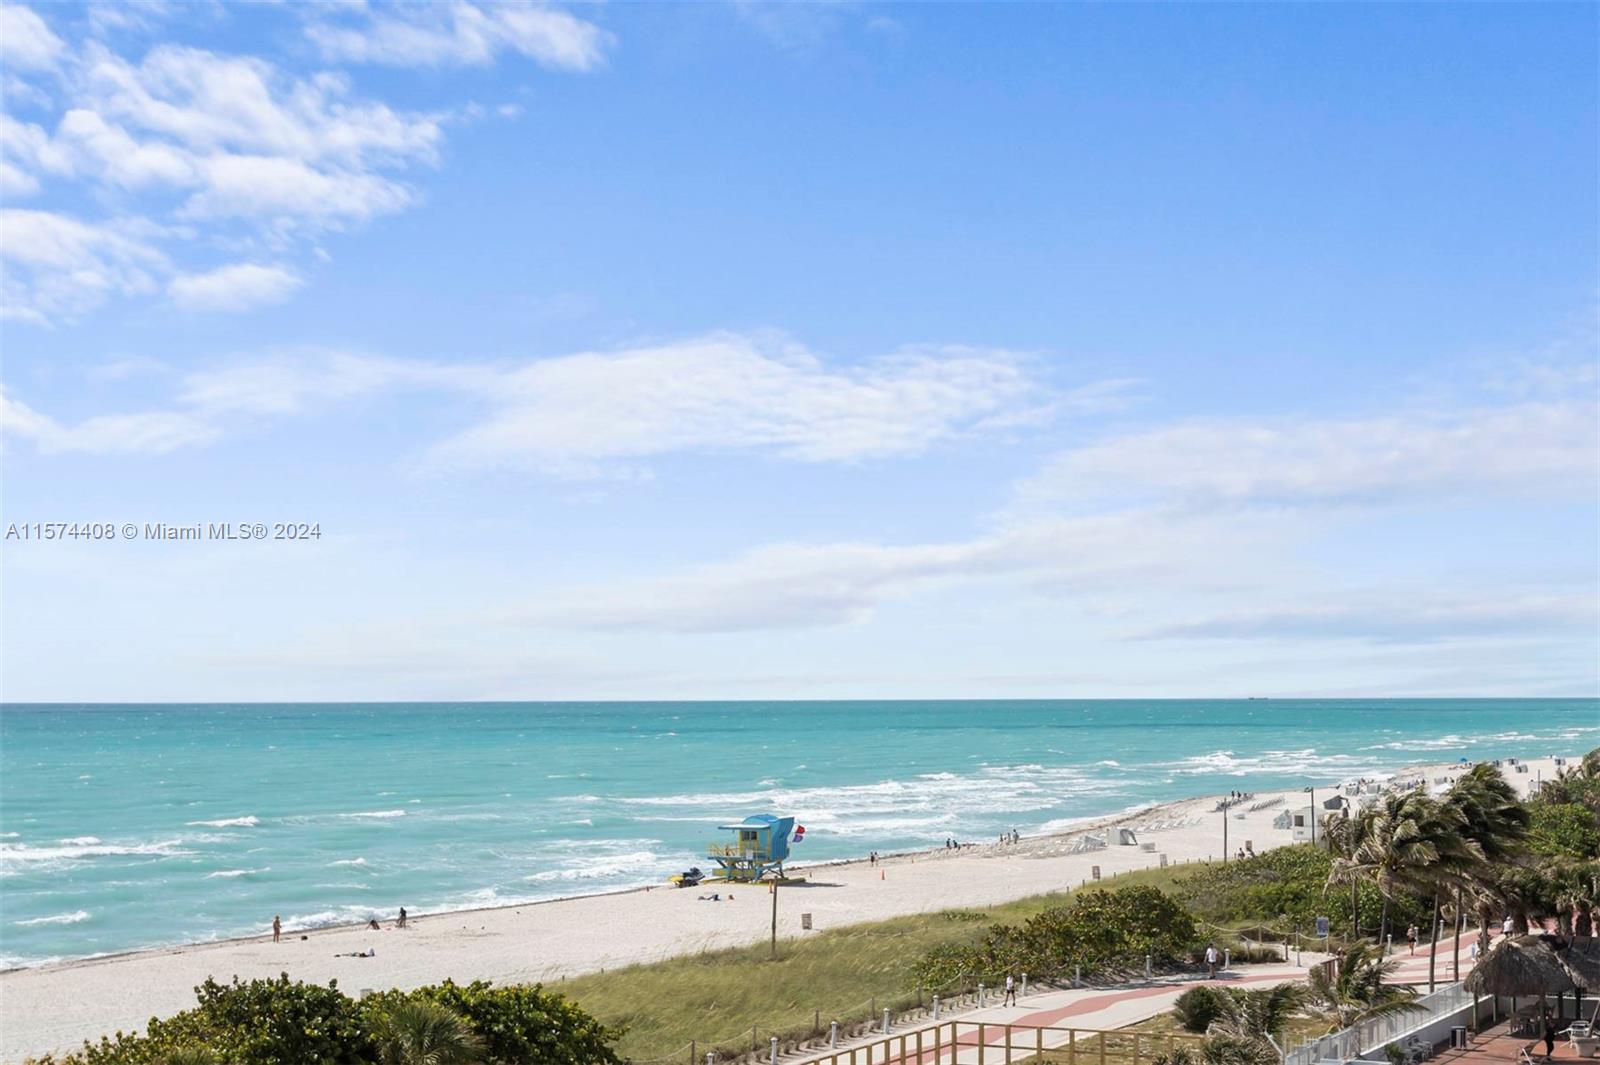 JUST RENOVATED 2 bed 2 bath oceanfront townhouse condo with direct ocean views and beach access. Enjoy this corner unit with 1230 SF, and 200 SF of balconies. Amenities include a private parking space & valet, 24-hour security, heated pool, brand new tennis courts, fitness center, sauna, racquetball court, beauty salon, and ocean access boating. Great location minutes from dining, shops, cultural venues, South Beach, & Miami International Airport. **Please note that photos are renderings and do not depict the actual unit. Property is currently under construction.